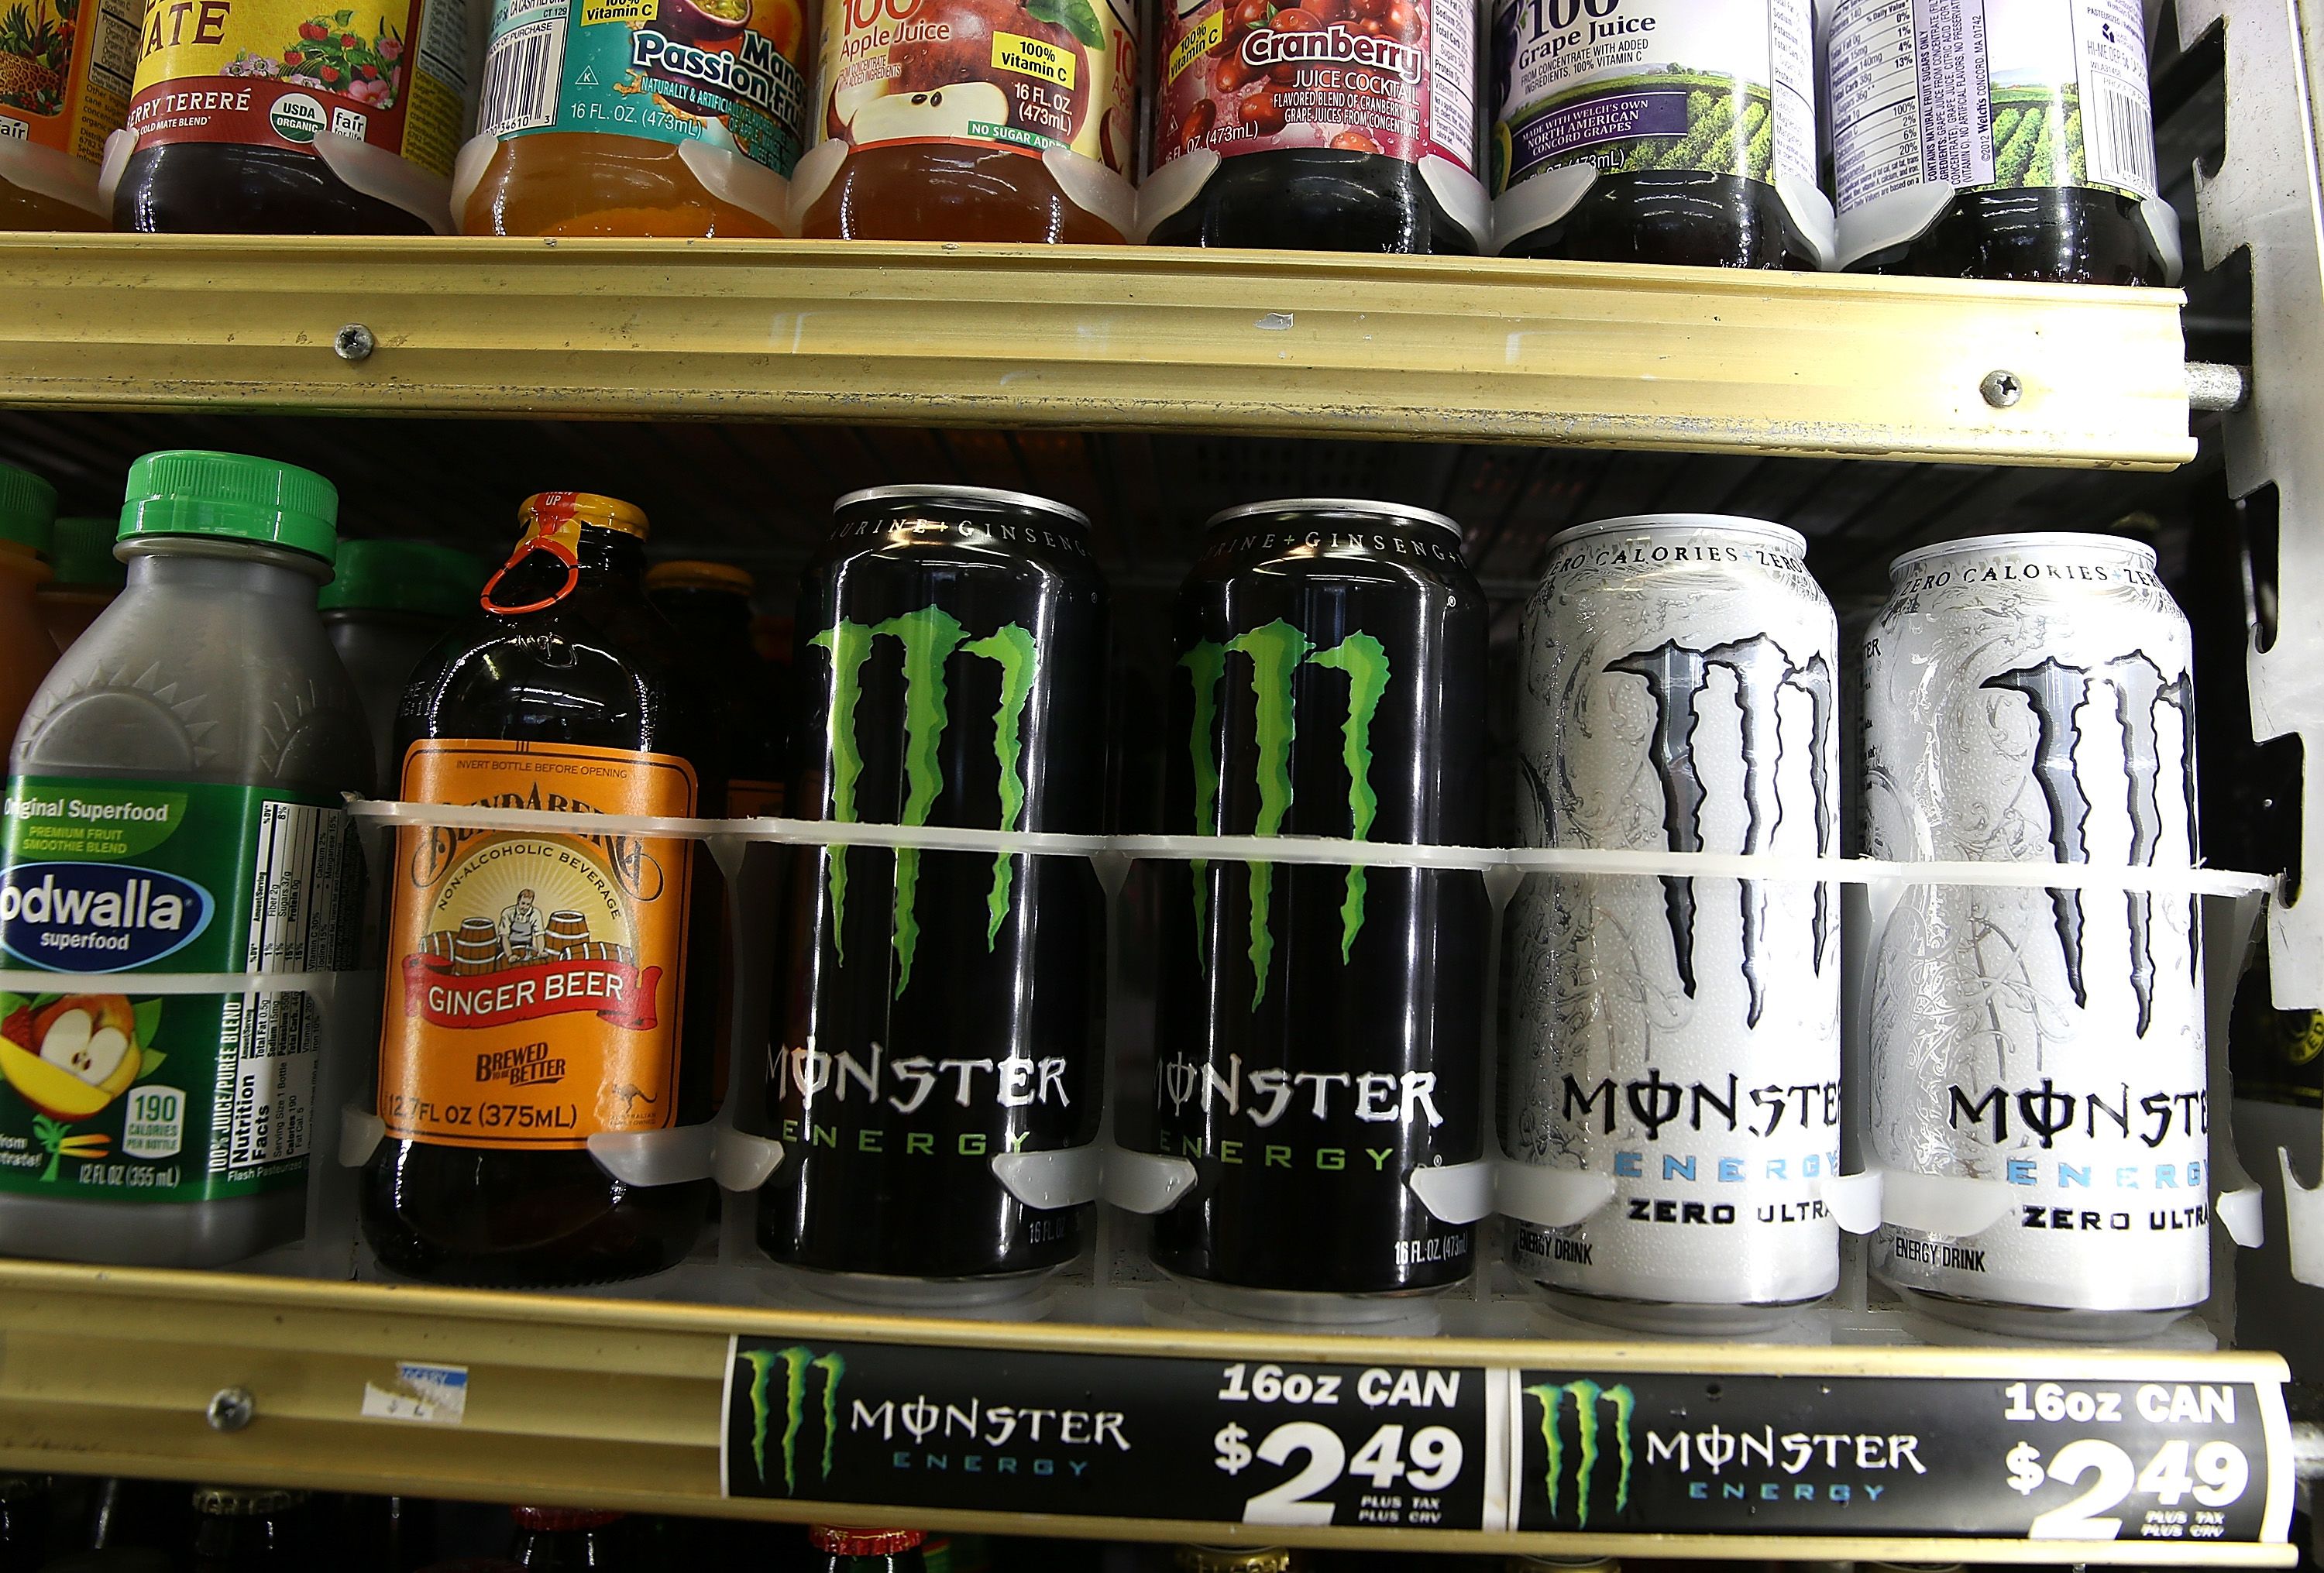 not really considered an energy drink but my local grocery store